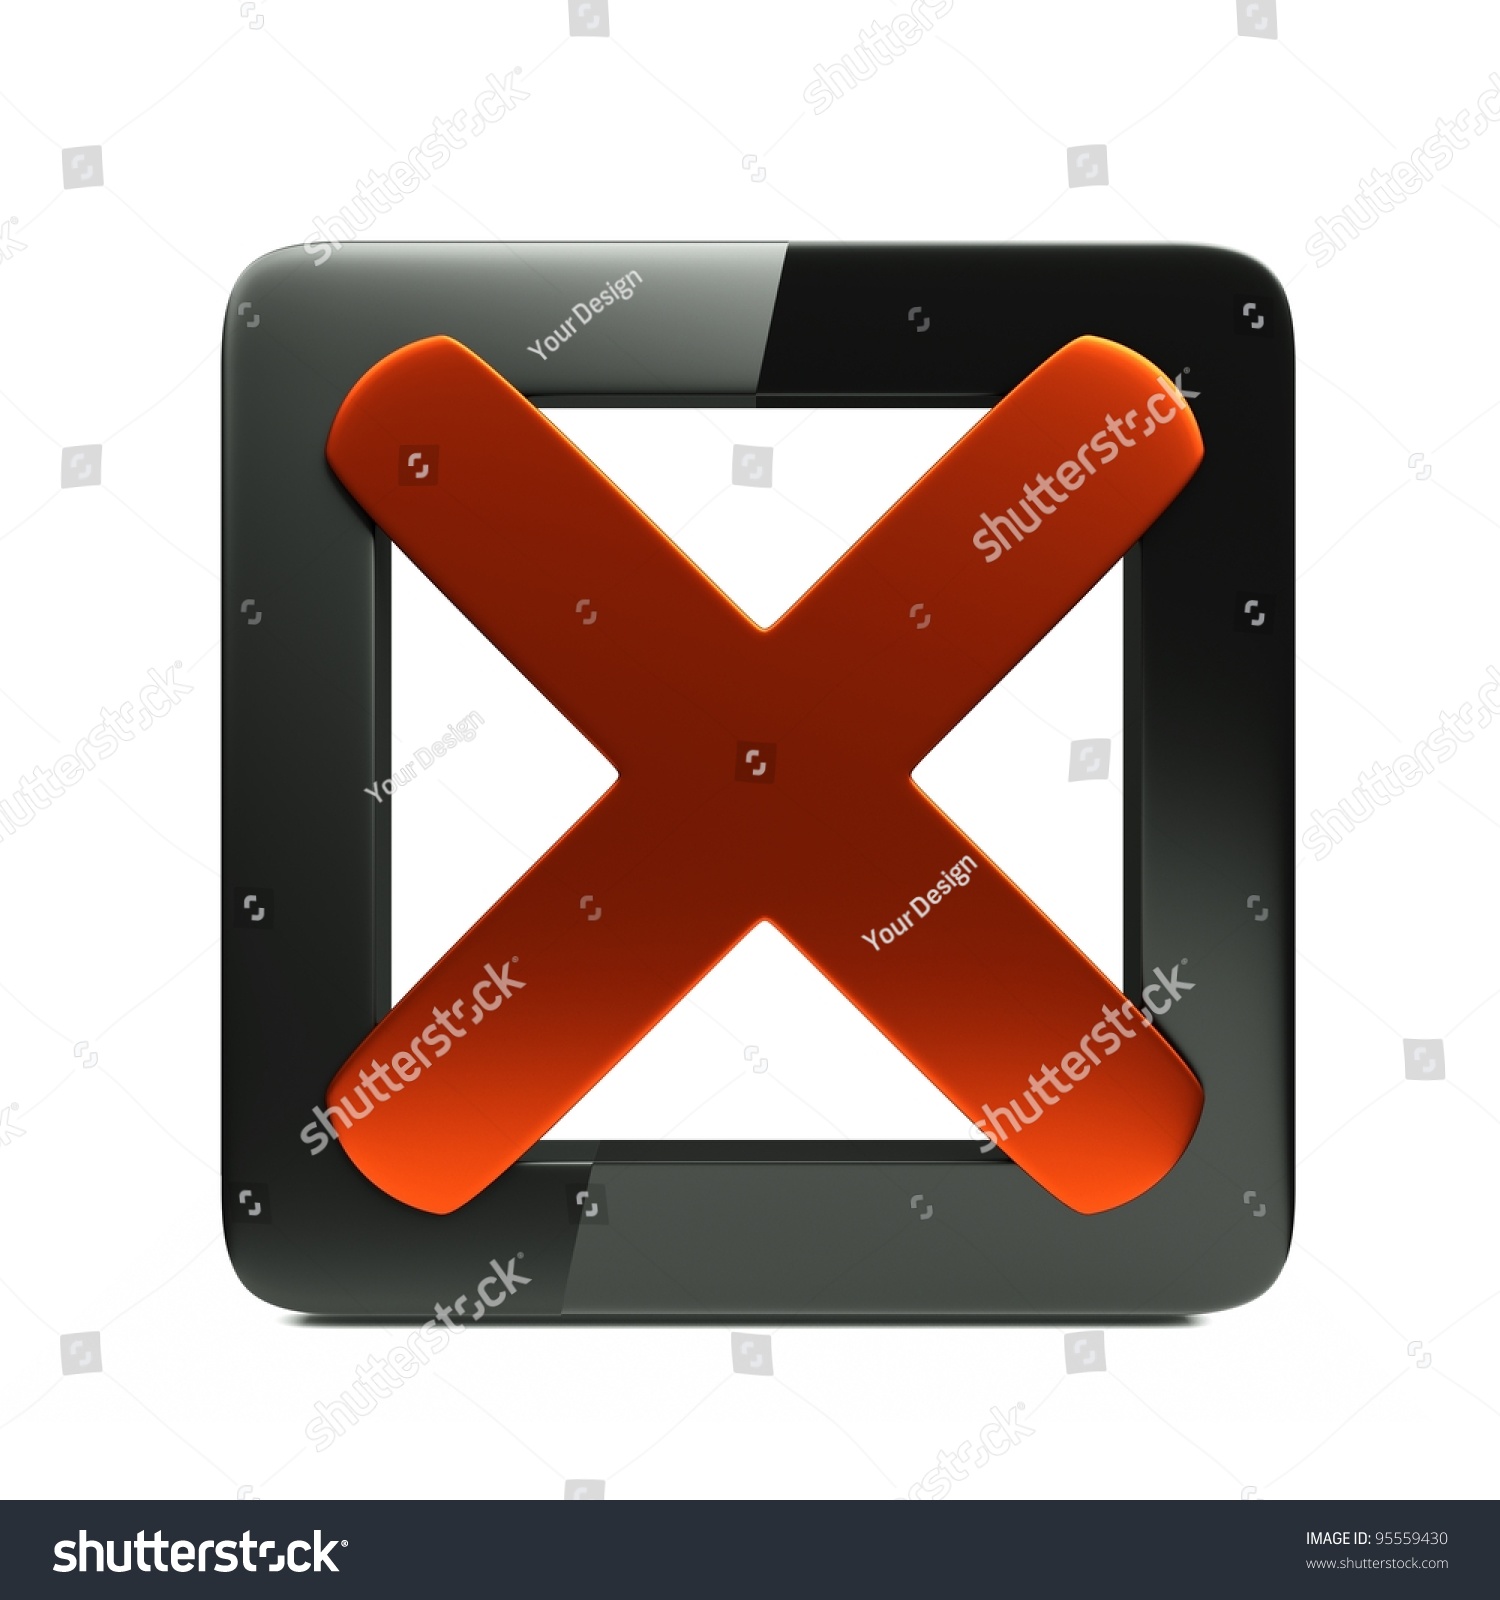 A Checkbox Icon Isolated On White Stock Photo 95559430 : Shutterstock